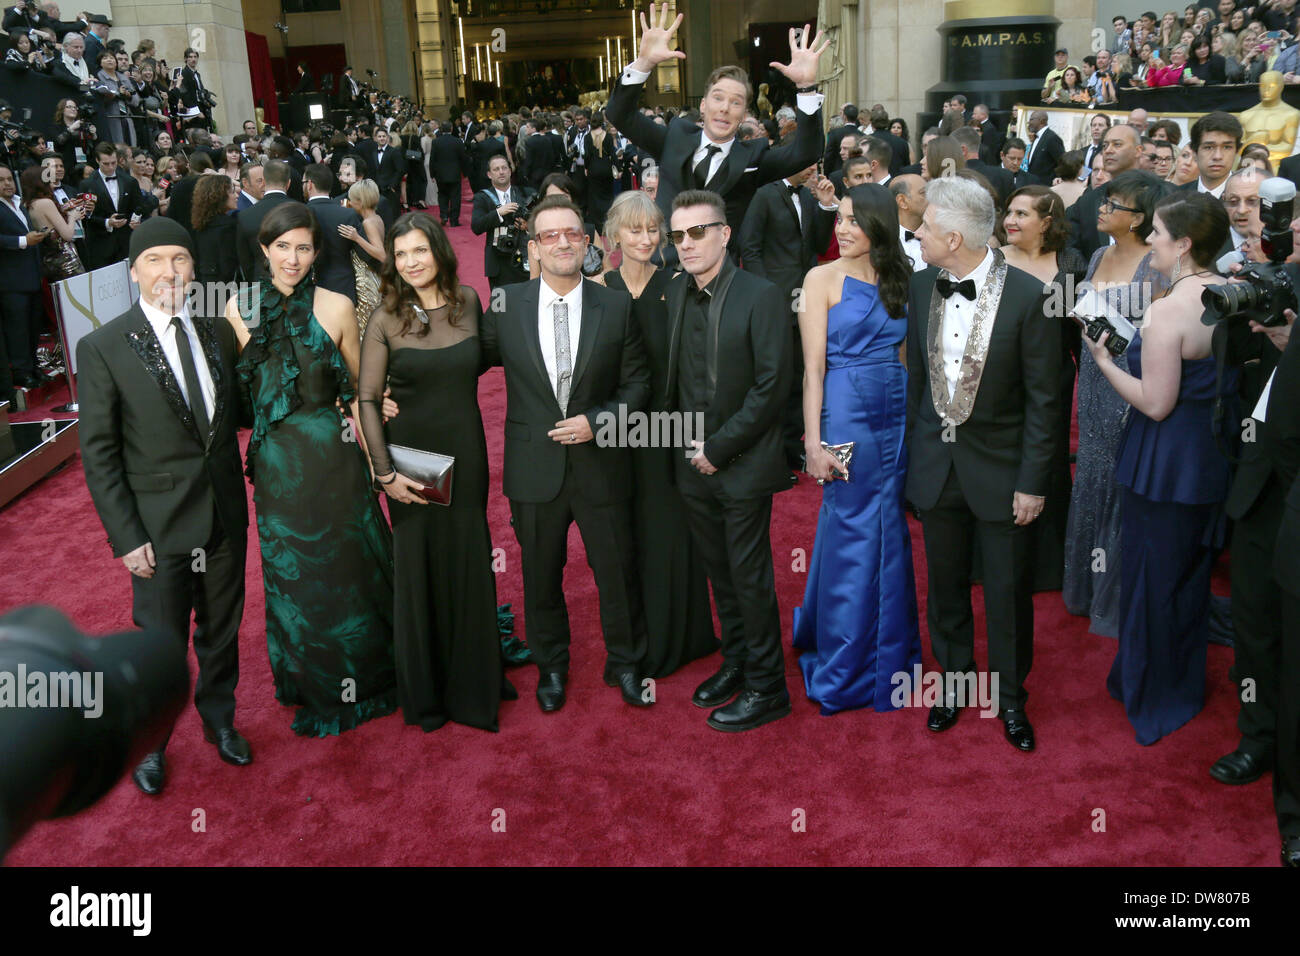 Hollywood, California, USA. 2nd March, 2014. U2 band member The Edge (l-r), Morleigh Steinberg, Ali Hewson, U2 band member Bono, U2 band member Larry Mullen Jr., Mariana Teixeira, and U2 band member Adam Clayton and actor Benedict Cumberbatch jumping behind attend the 86th Academy Awards aka Oscars at Dolby Theatre in Los Angeles, USA, on 02 March 2014.  Credit:   Hubert Boesl/dpa picture alliance/Alamy Live News Stock Photo